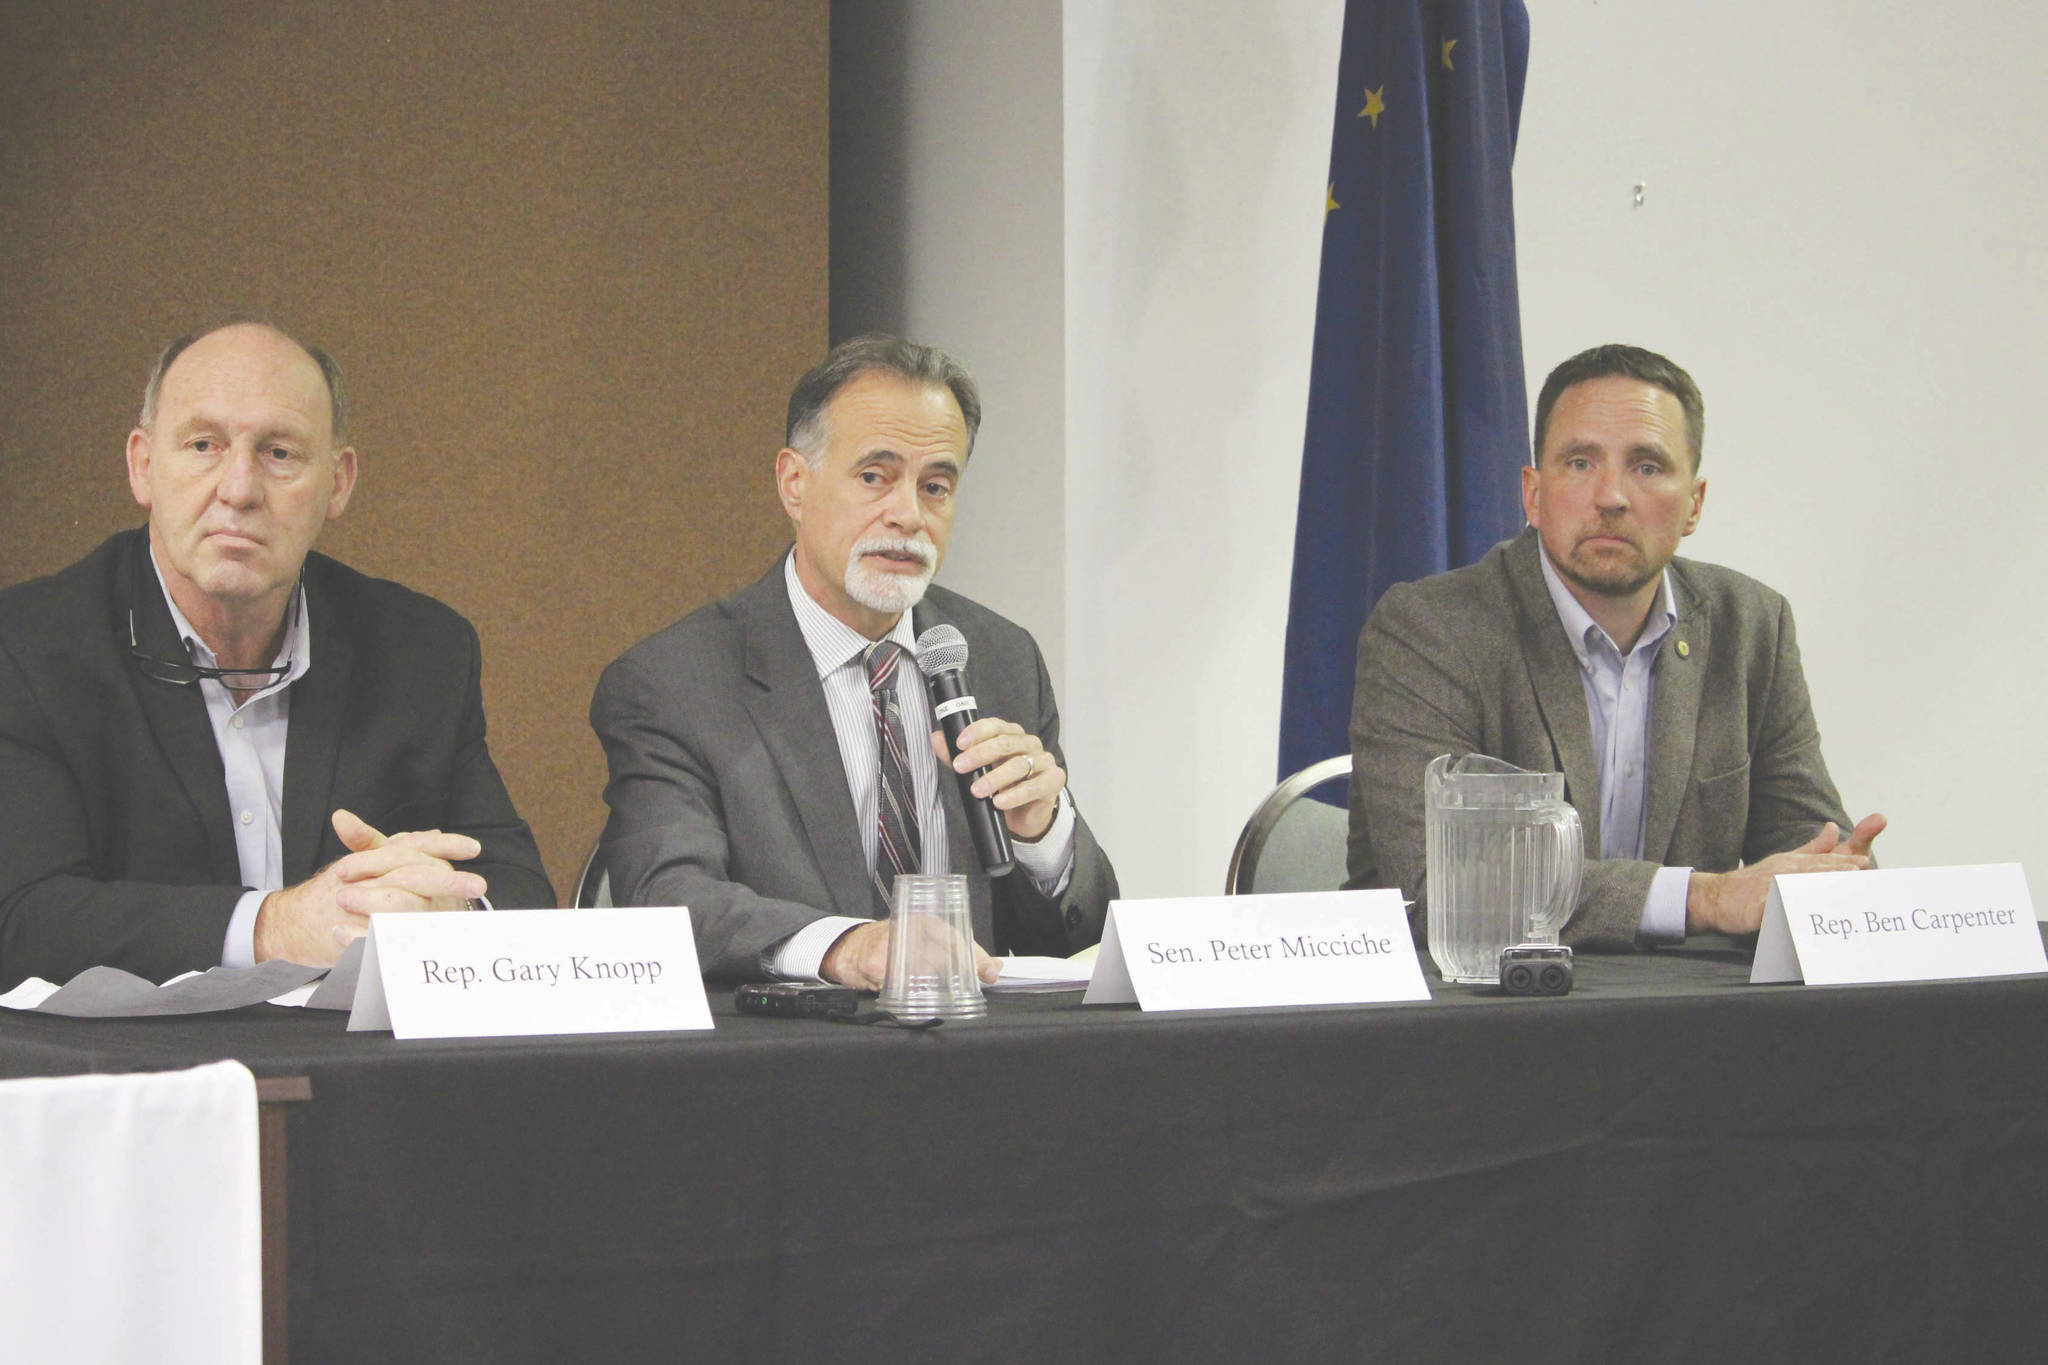 Brian Mazurek / Peninsula Clarion                                Rep. Gary Knopp, R-Soldotna, Sen. Peter Micciche, R- Soldotna, and Rep. Ben Carpenter, R-Nikiski, speak to members of the Kenai and Soldotna Chambers of Commerce at the Kenai Visitor and Cultural Center on Wednesday.